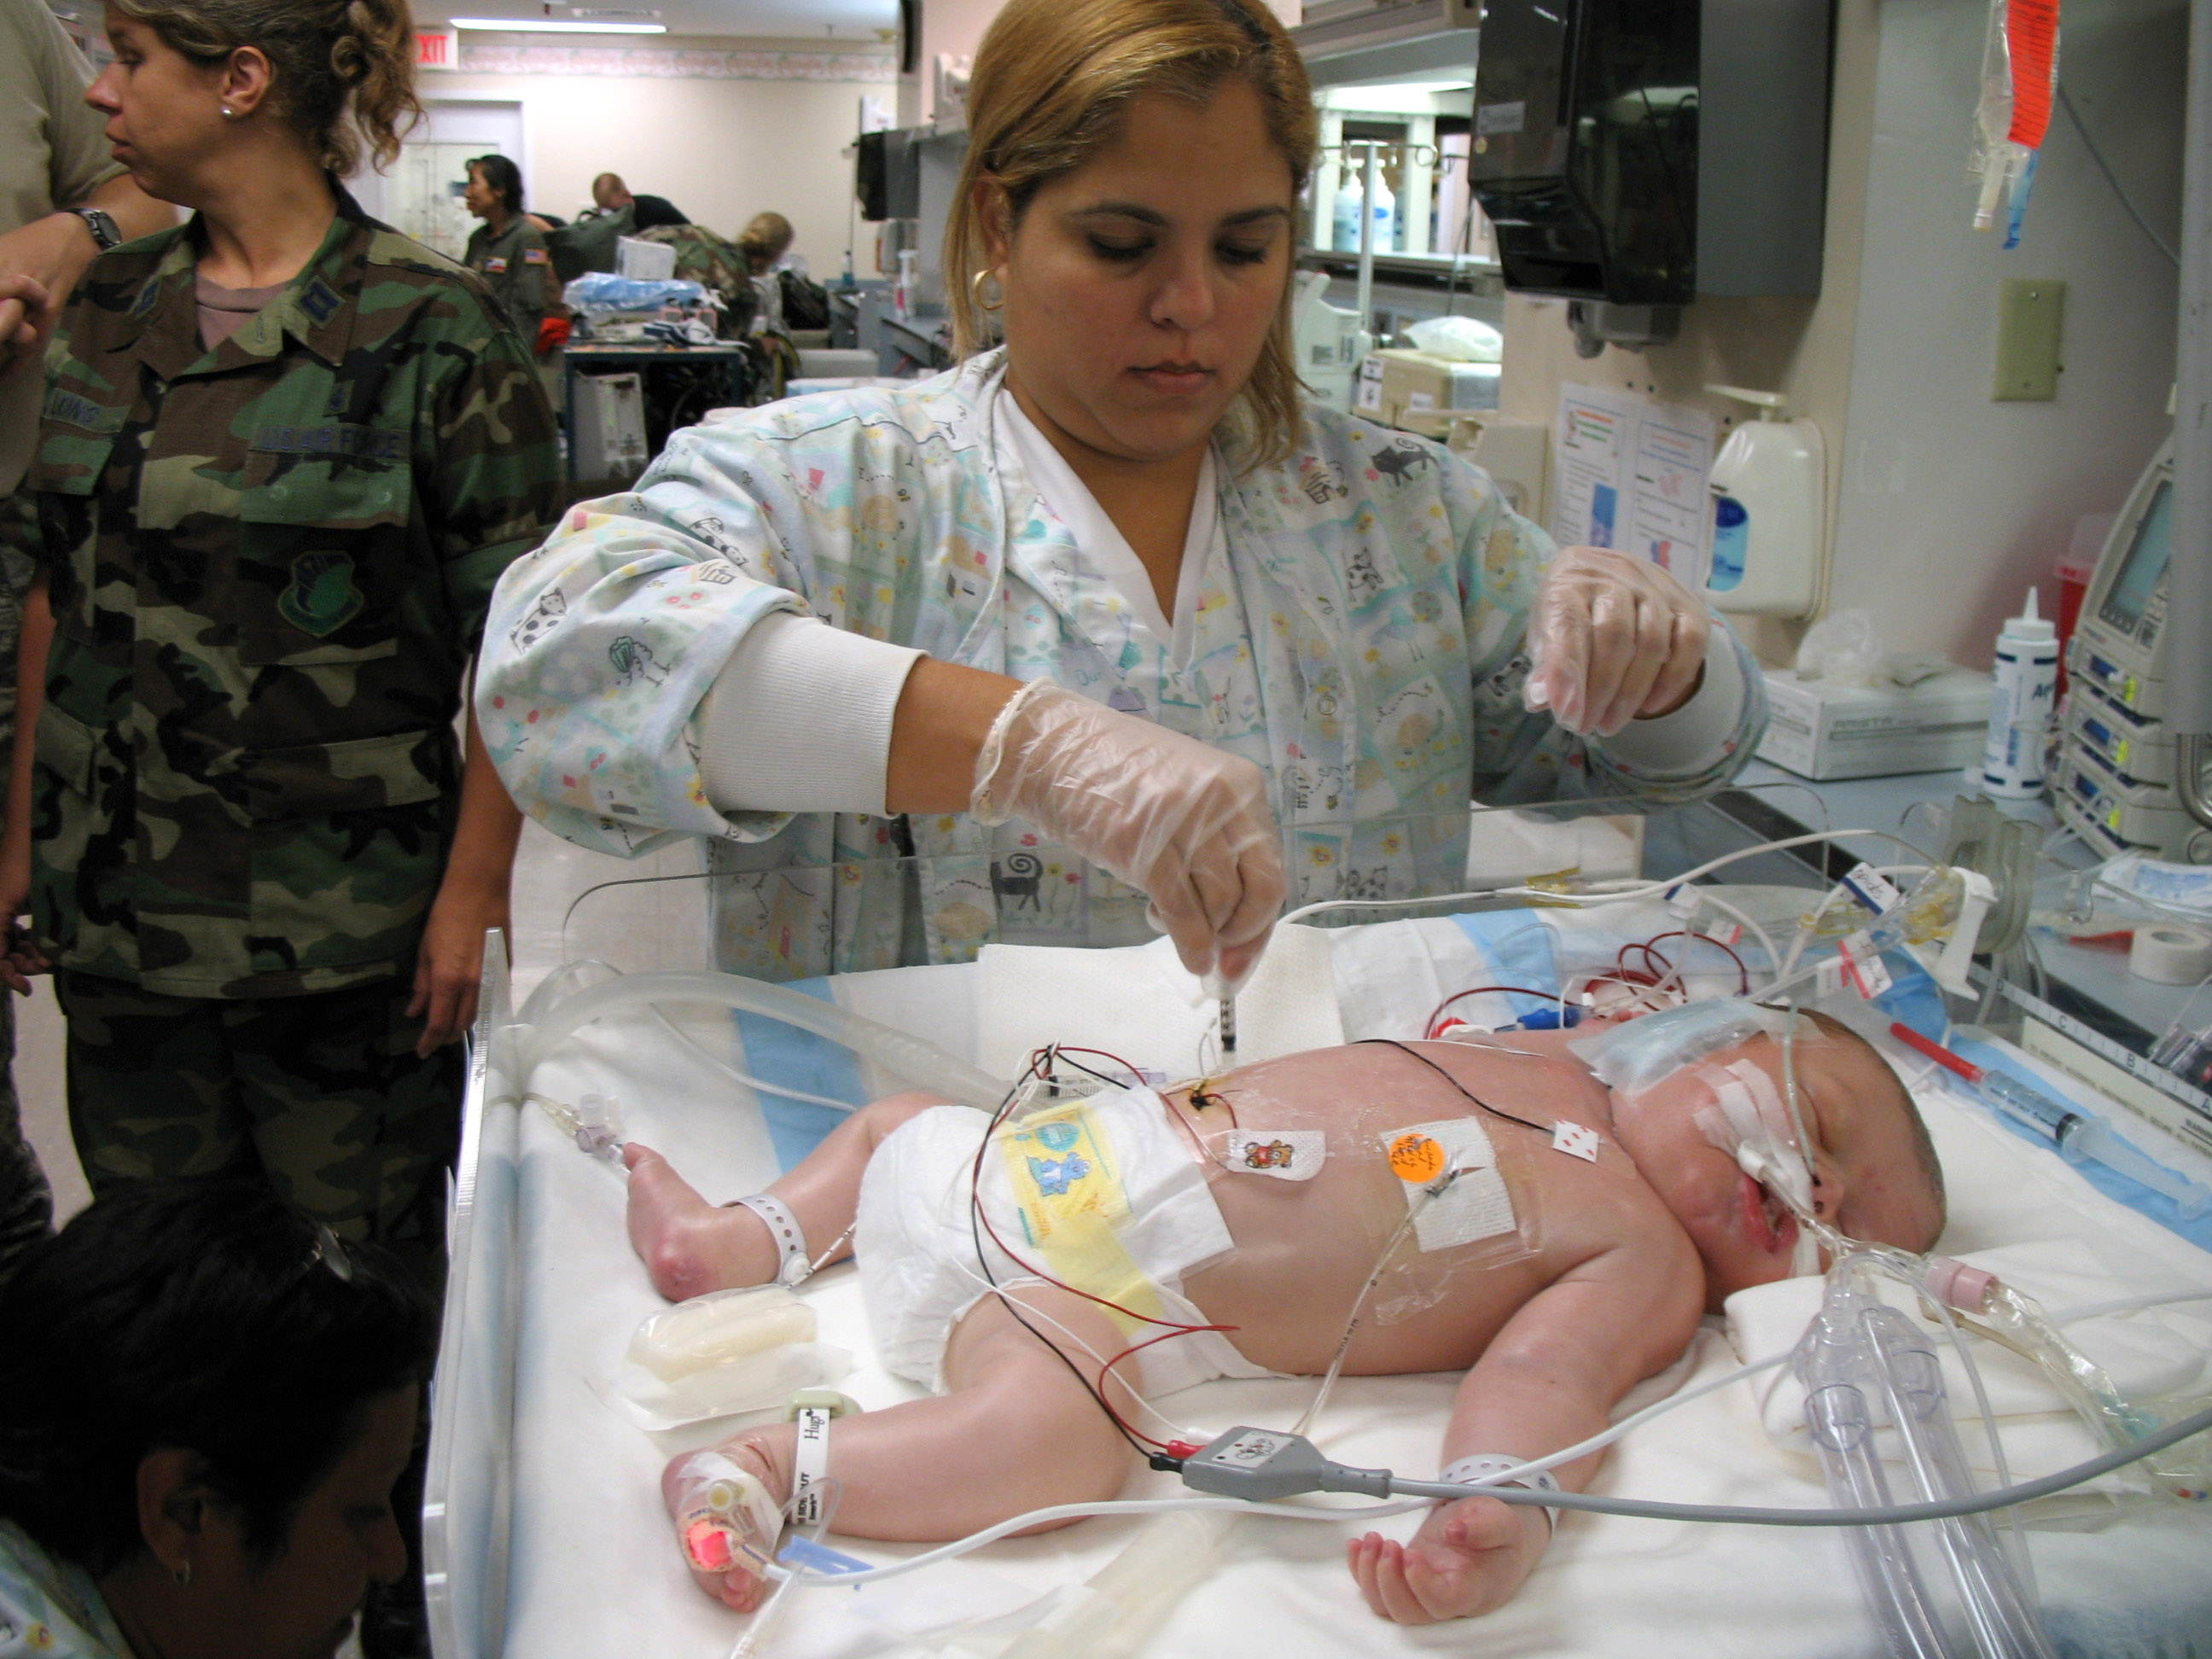 Respiratory therapist Michelle Sirra takes a blood sample from 3-day-old Stuart Parker in preparation for transfer to an Extracorporeal Membrane Oxygenation unit on Friday, July 21, in San Juan, Puerto Rico. An ECMO team comprised Air Force and Army medical specialists from the Wilford Hall Medical Center at Lackland Air Force Base, Texas, flew to Puerto Rico to transport Stuart to San Antonio for more advanced care. 